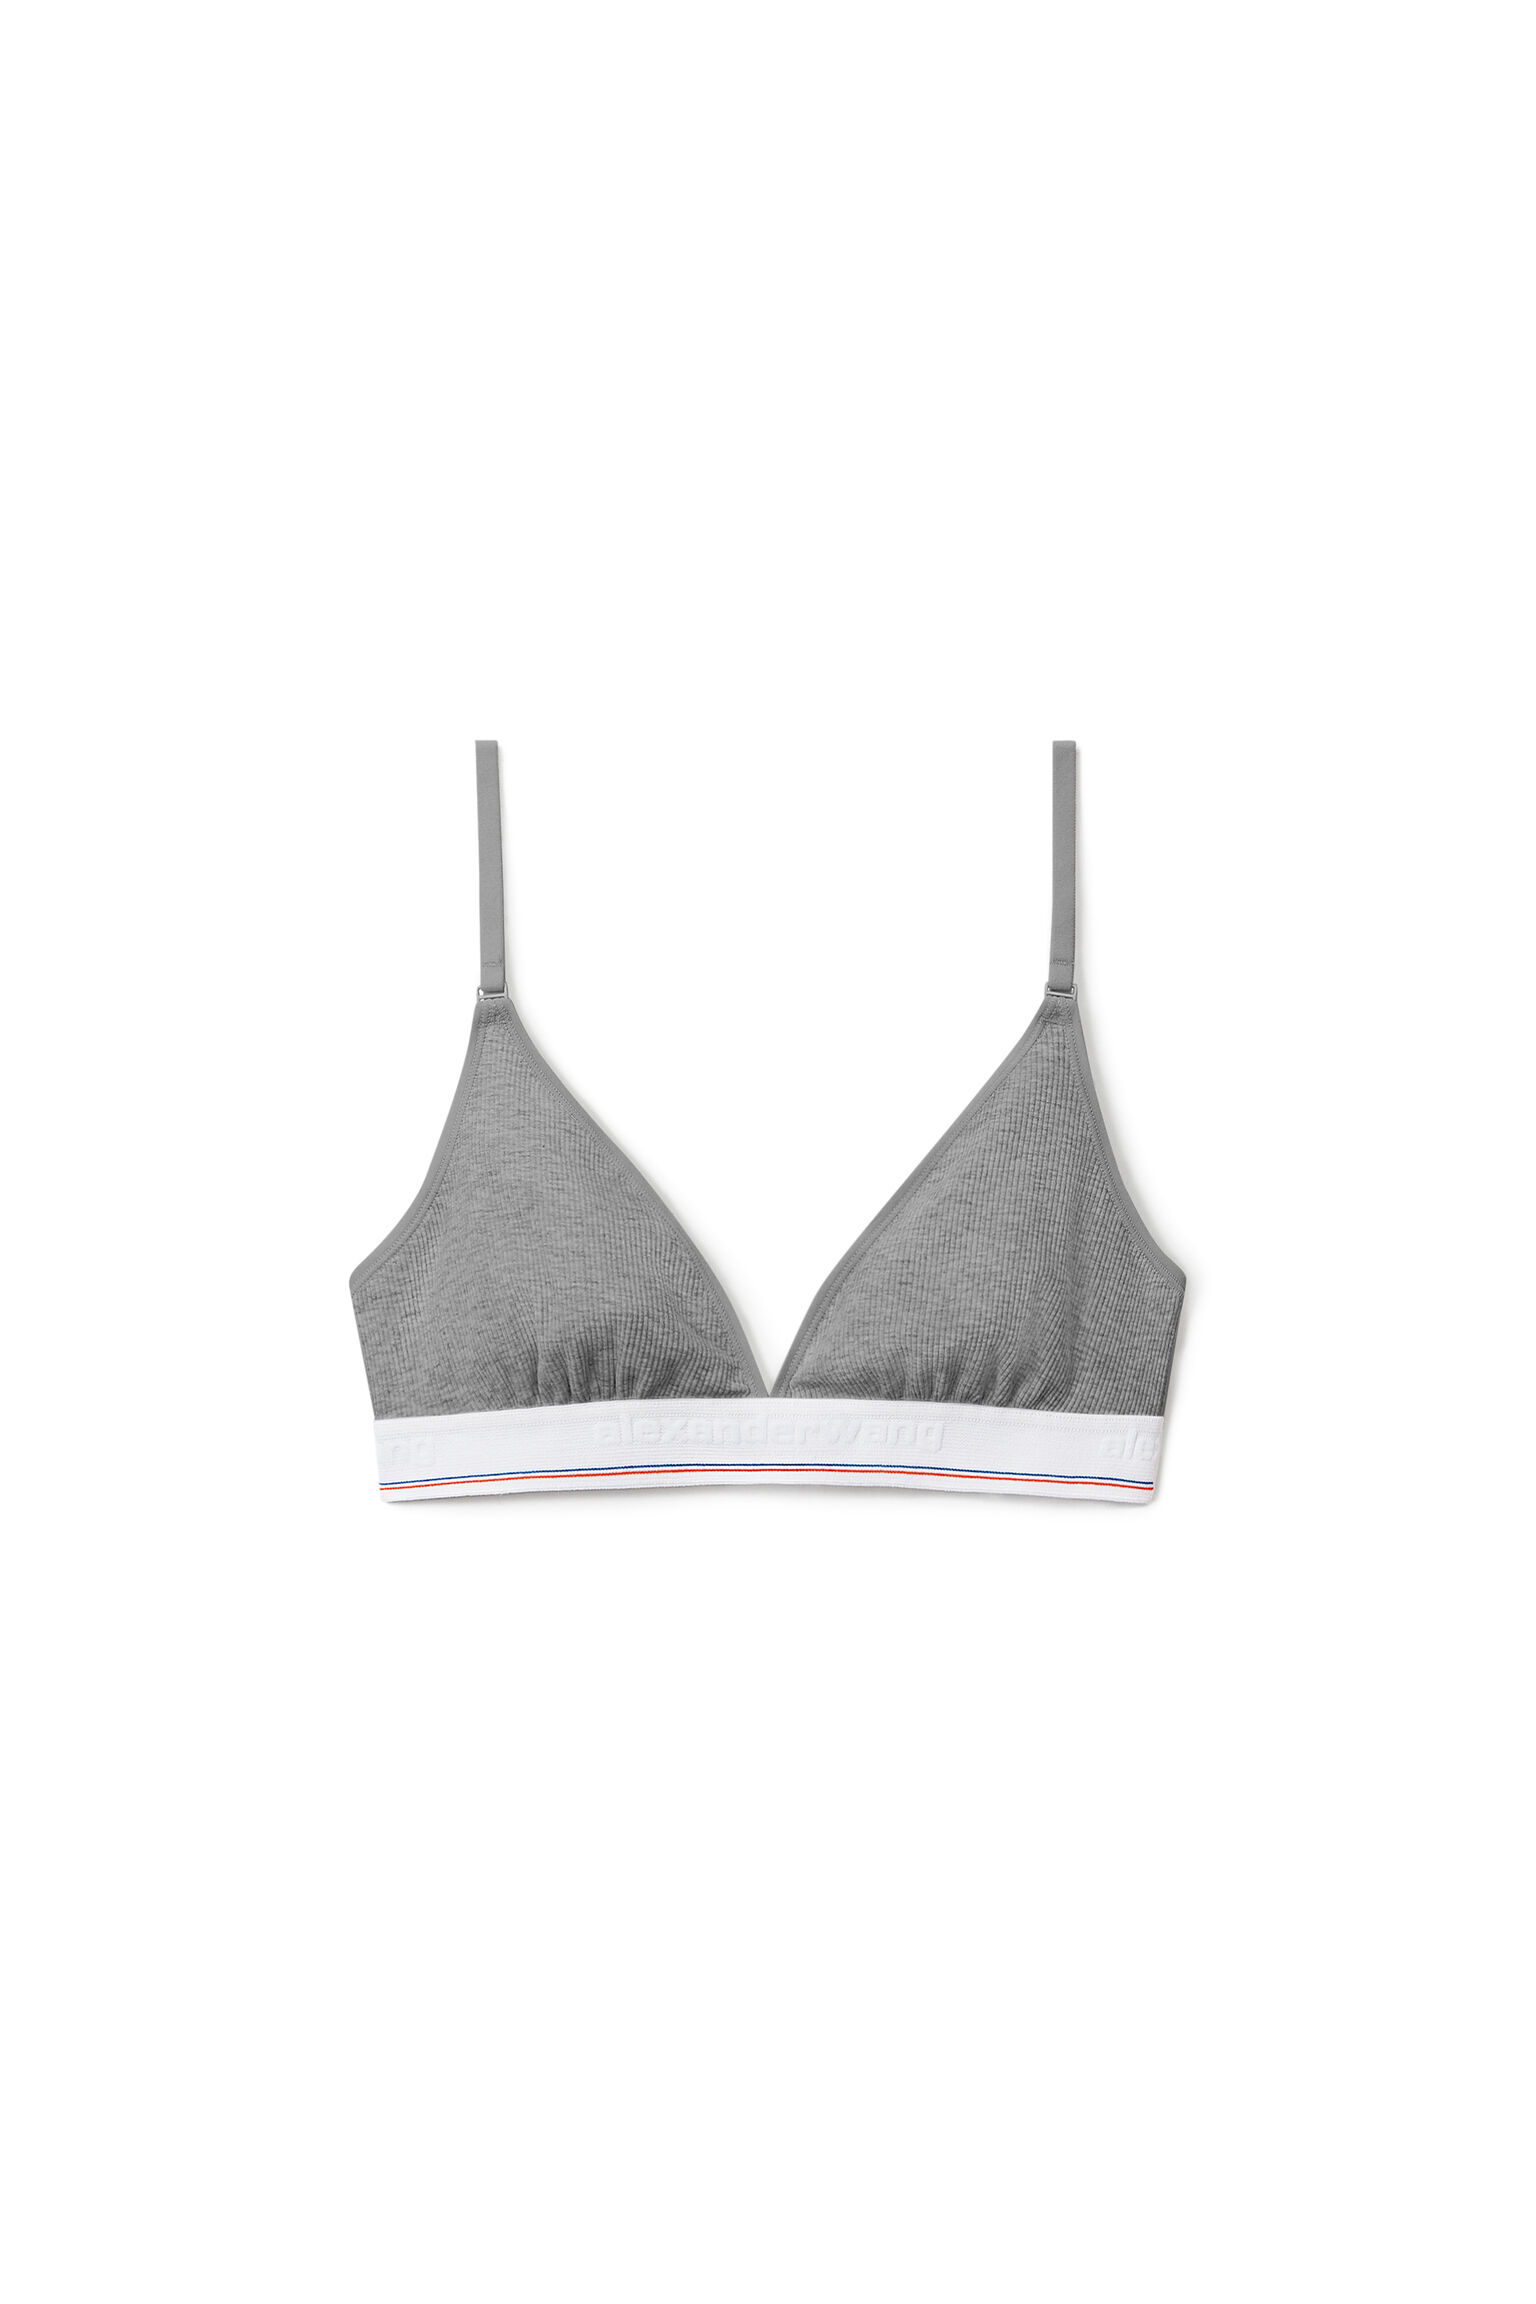 Women's Whipped Moon Triangle Bra  Moon Plunge Bra - Comfy V-Neck